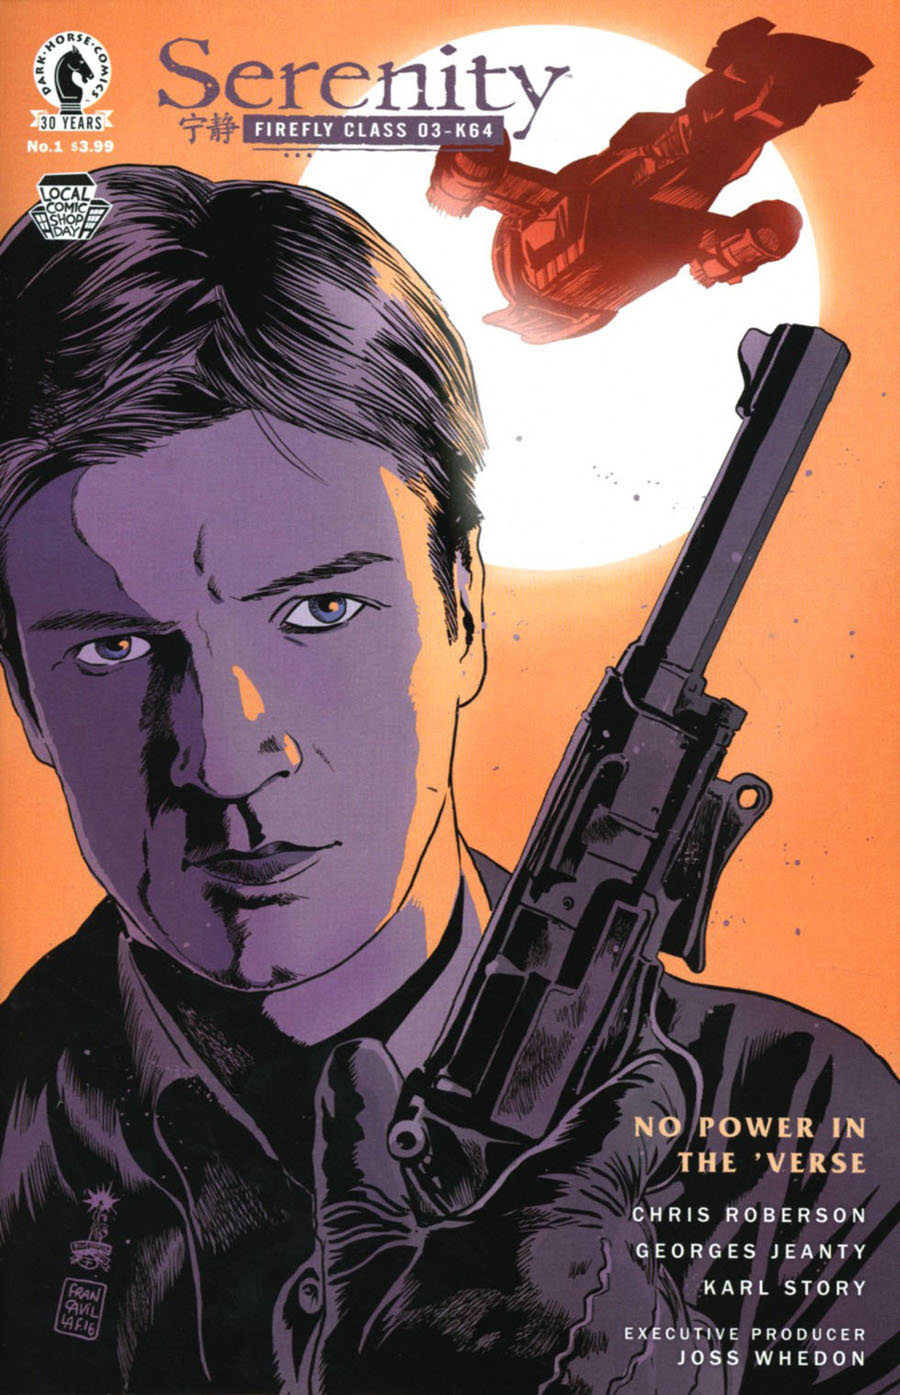 Serenity No Power In The Verse #1 Local Comic Shop Day 2016 Exclusive Variant